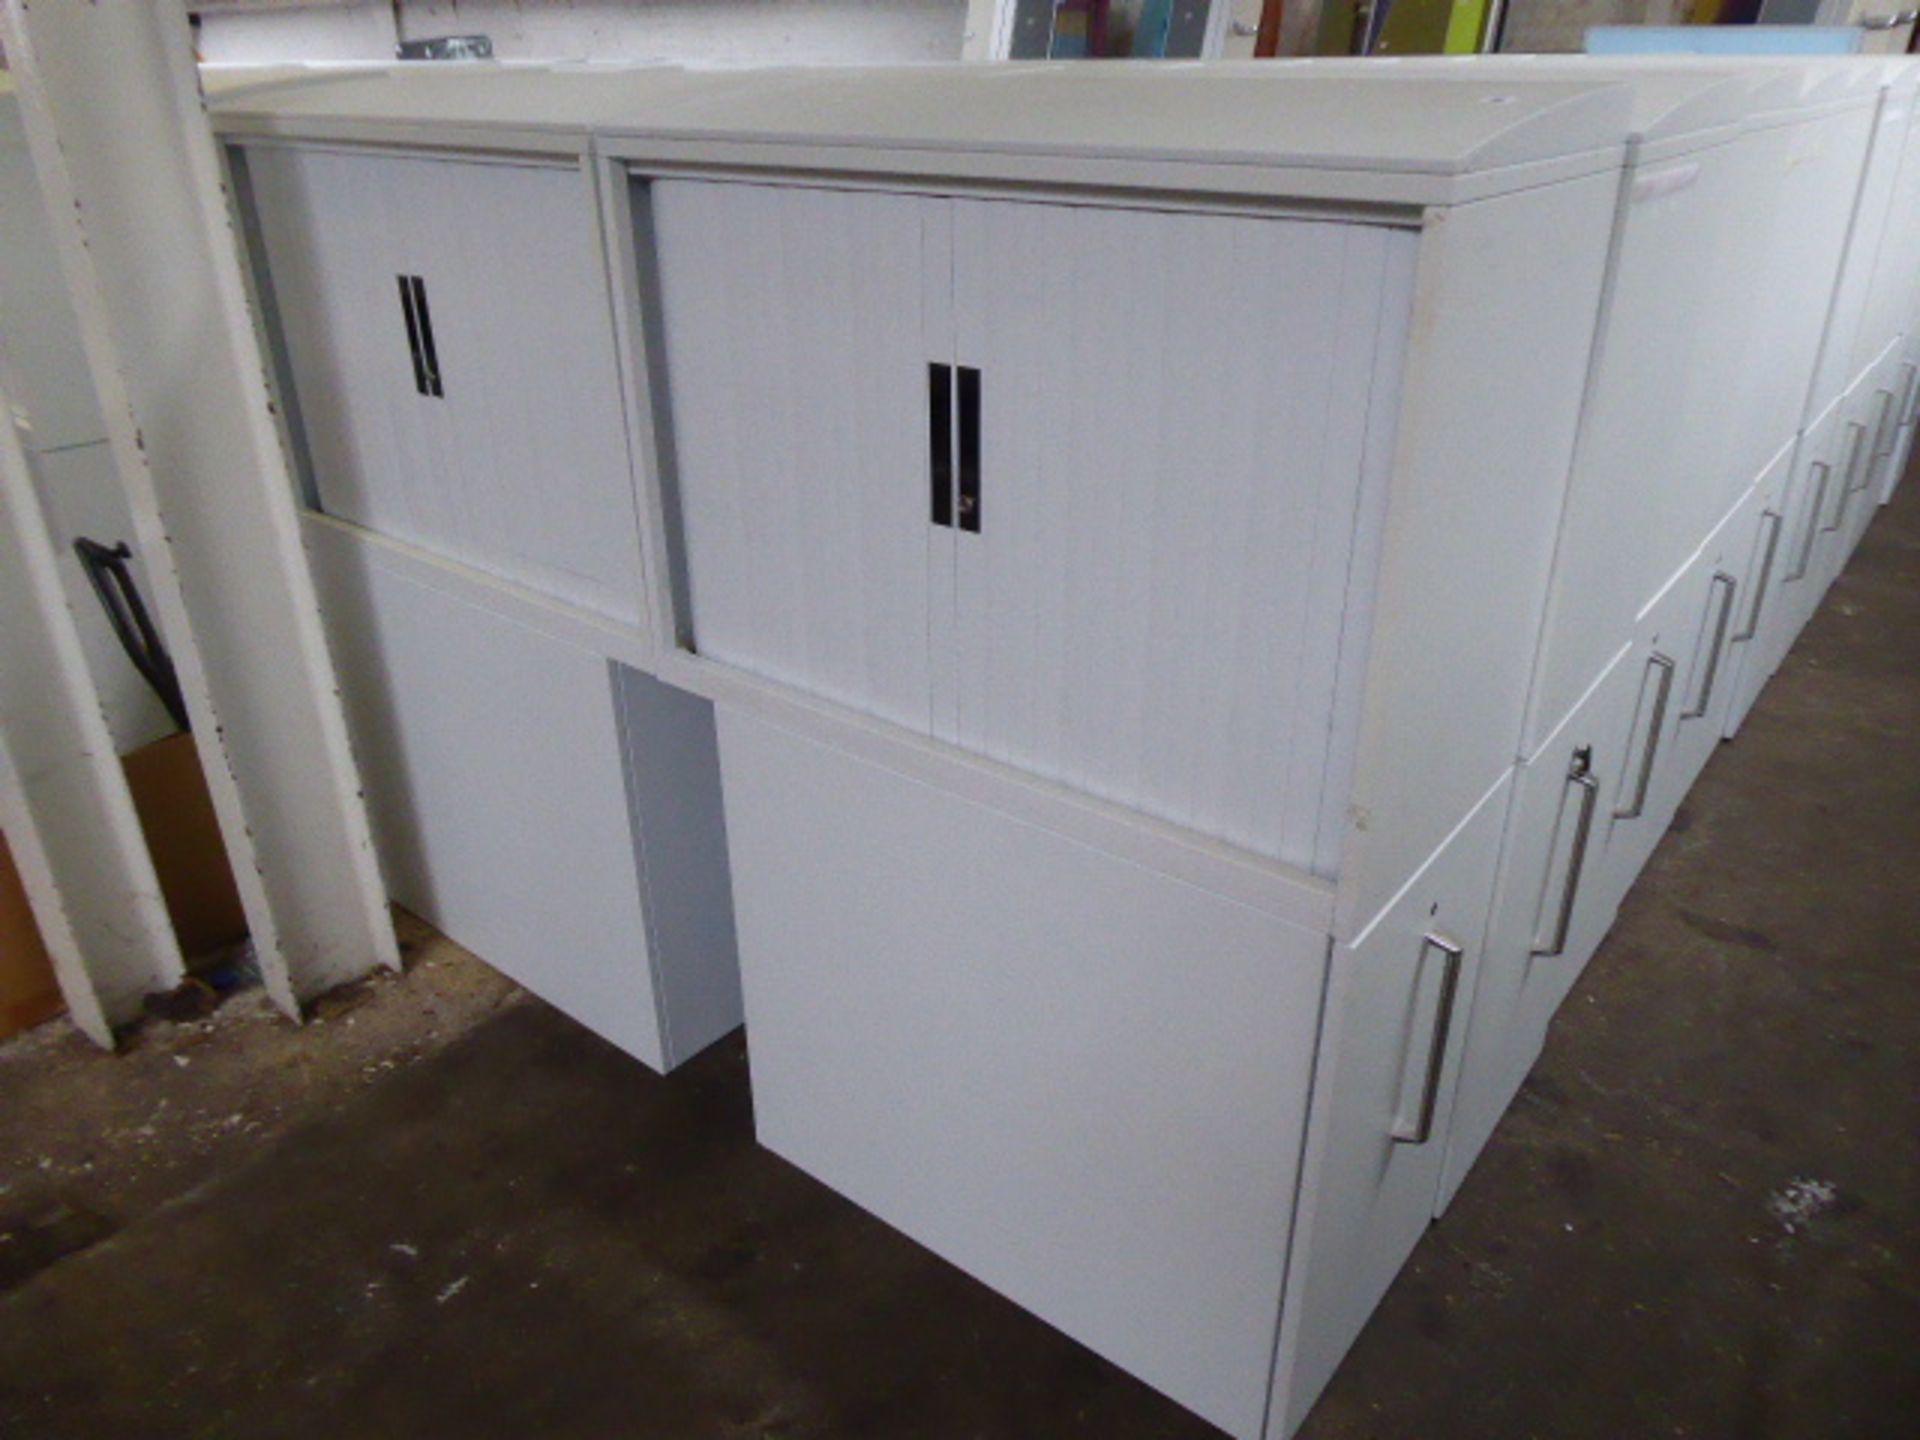 4 workstation storage units in grey with a single tambour top cabinet 90cm wide and a heavy secure